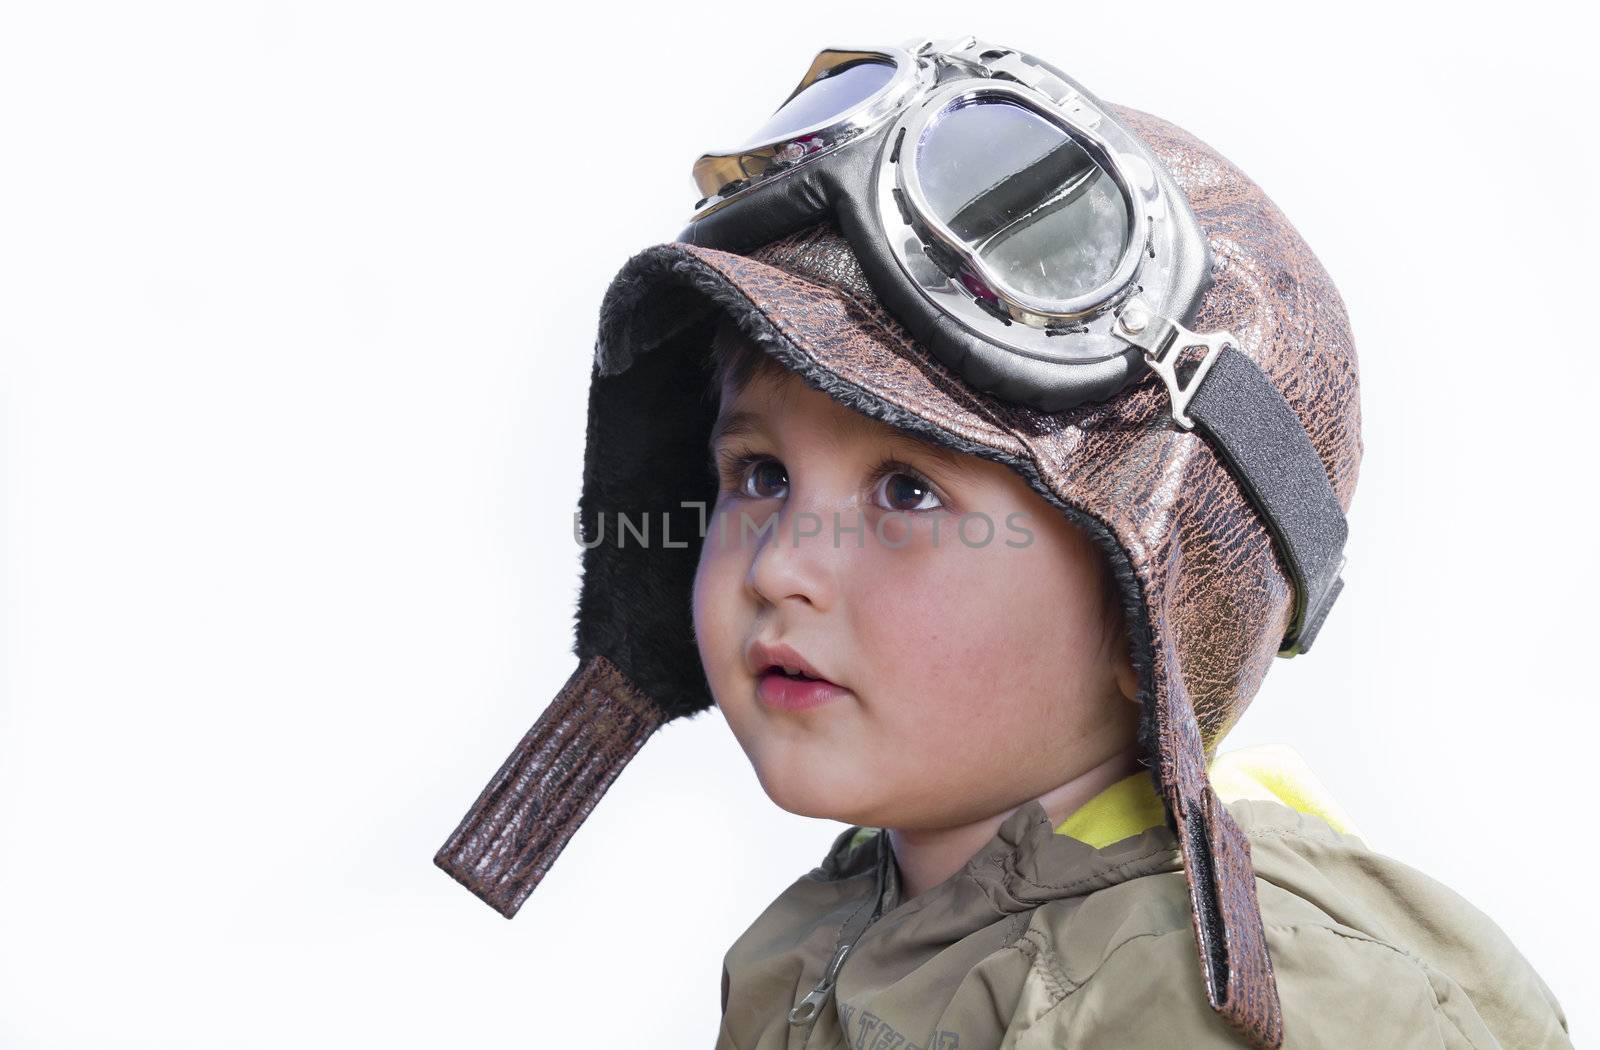 A little cute baby dreams of becoming a pilot. Pilot outfit, hat by FernandoCortes